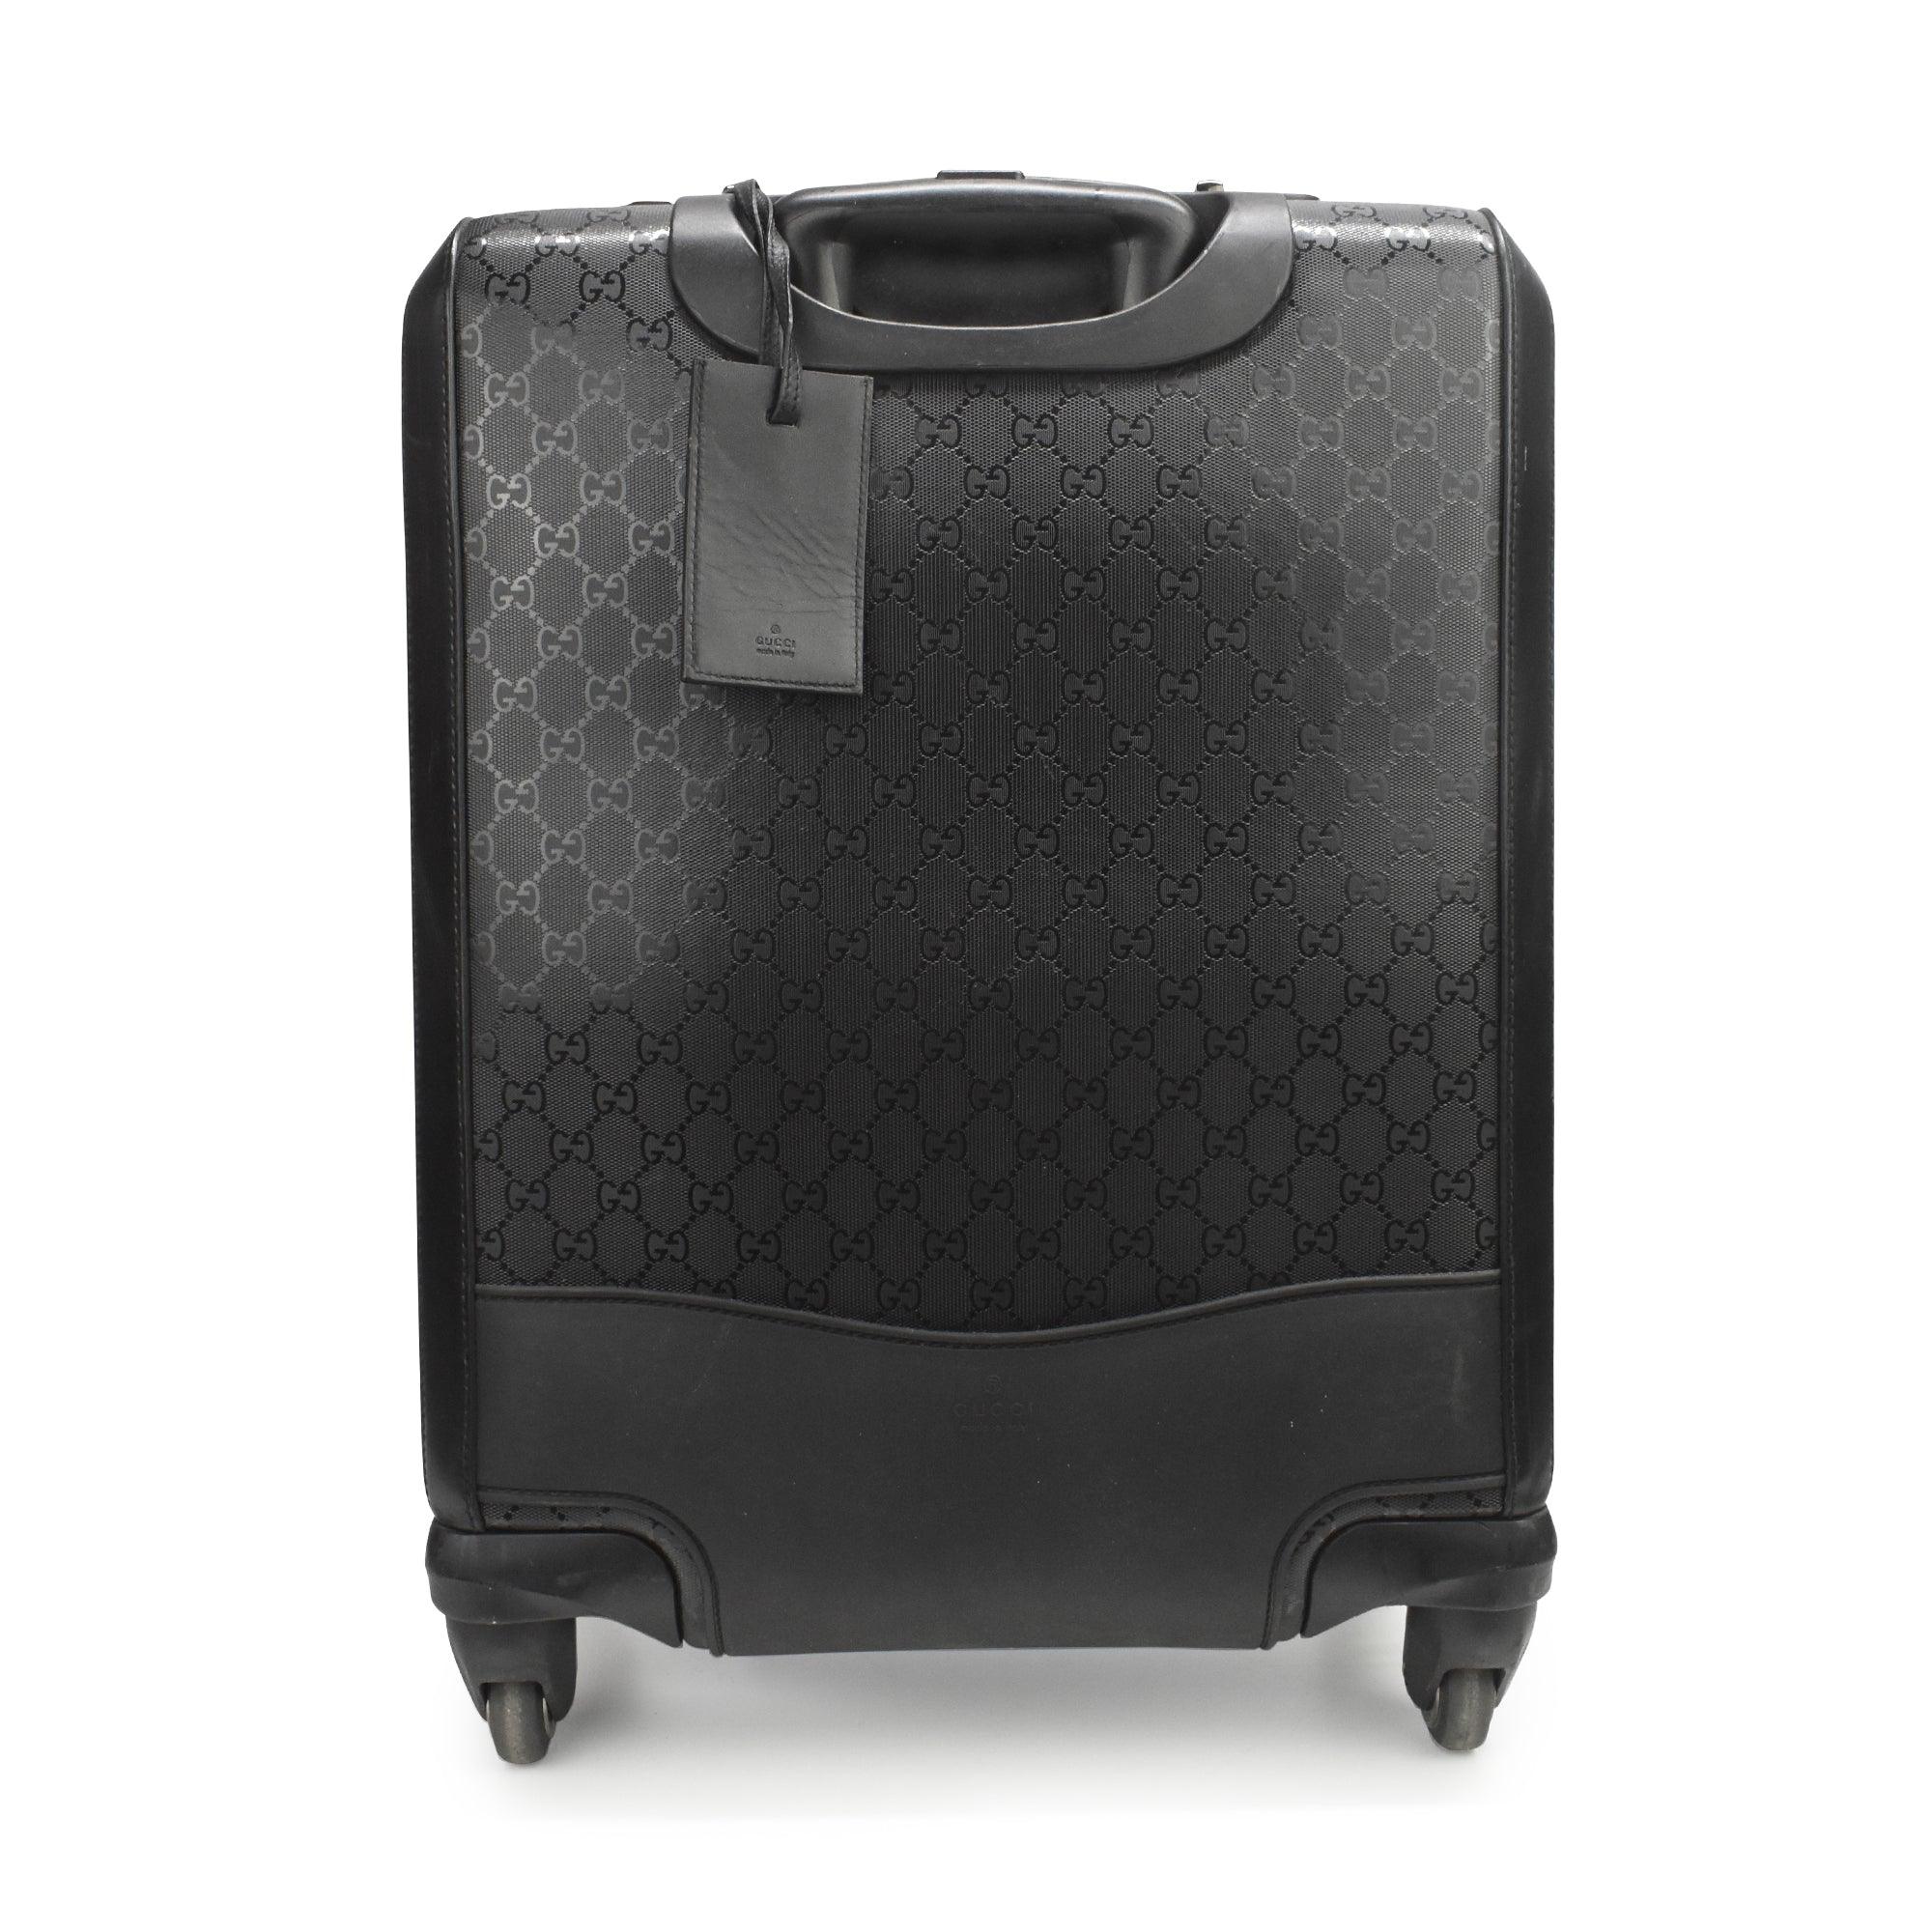 Gucci Carry on Luggage - Fashionably Yours